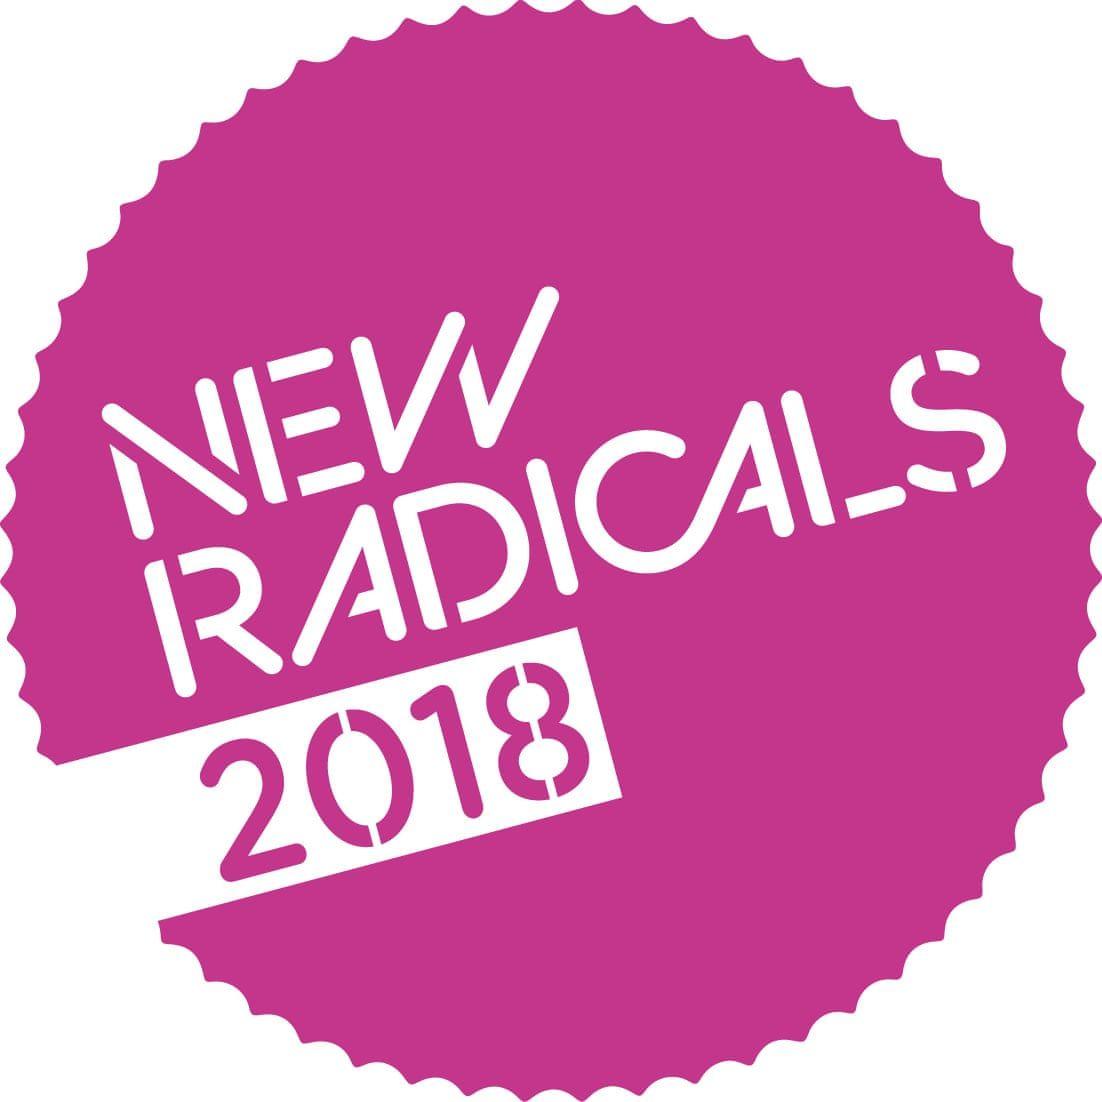 Word 2018 Logo - New Radicals logo featuring 2018 - Words of Colour - Words of Colour